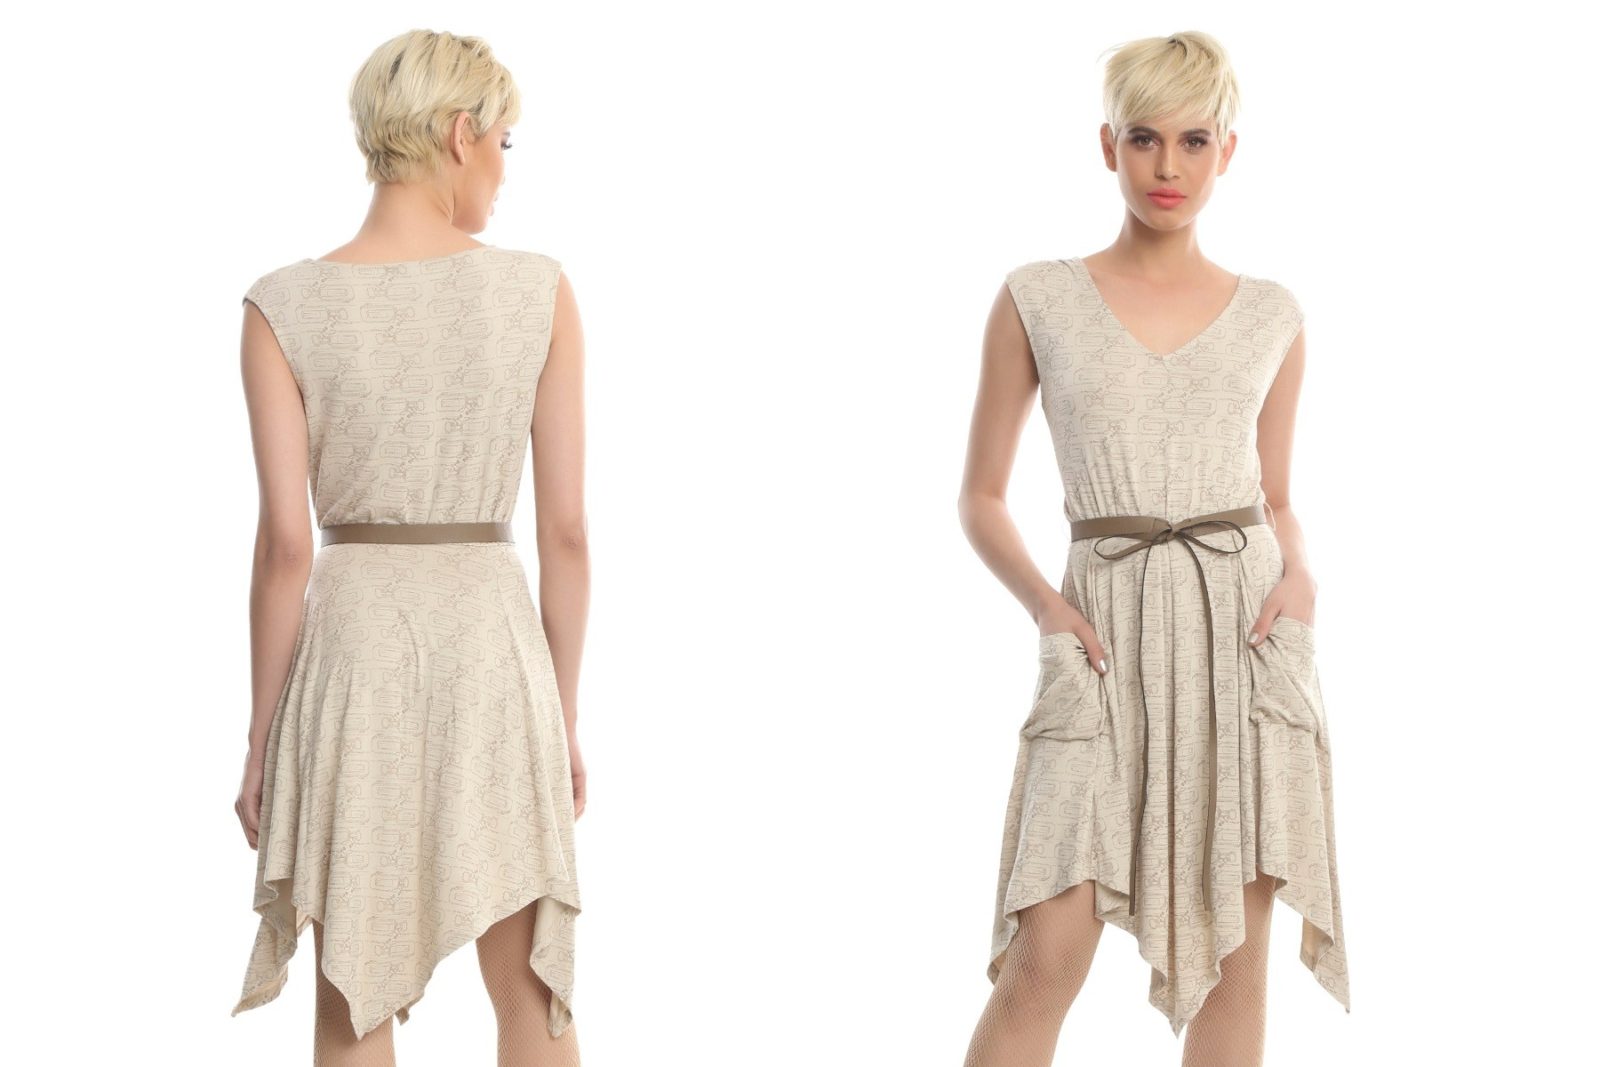 Women's Her Universe x Star Wars Rey dress at Hot Topic